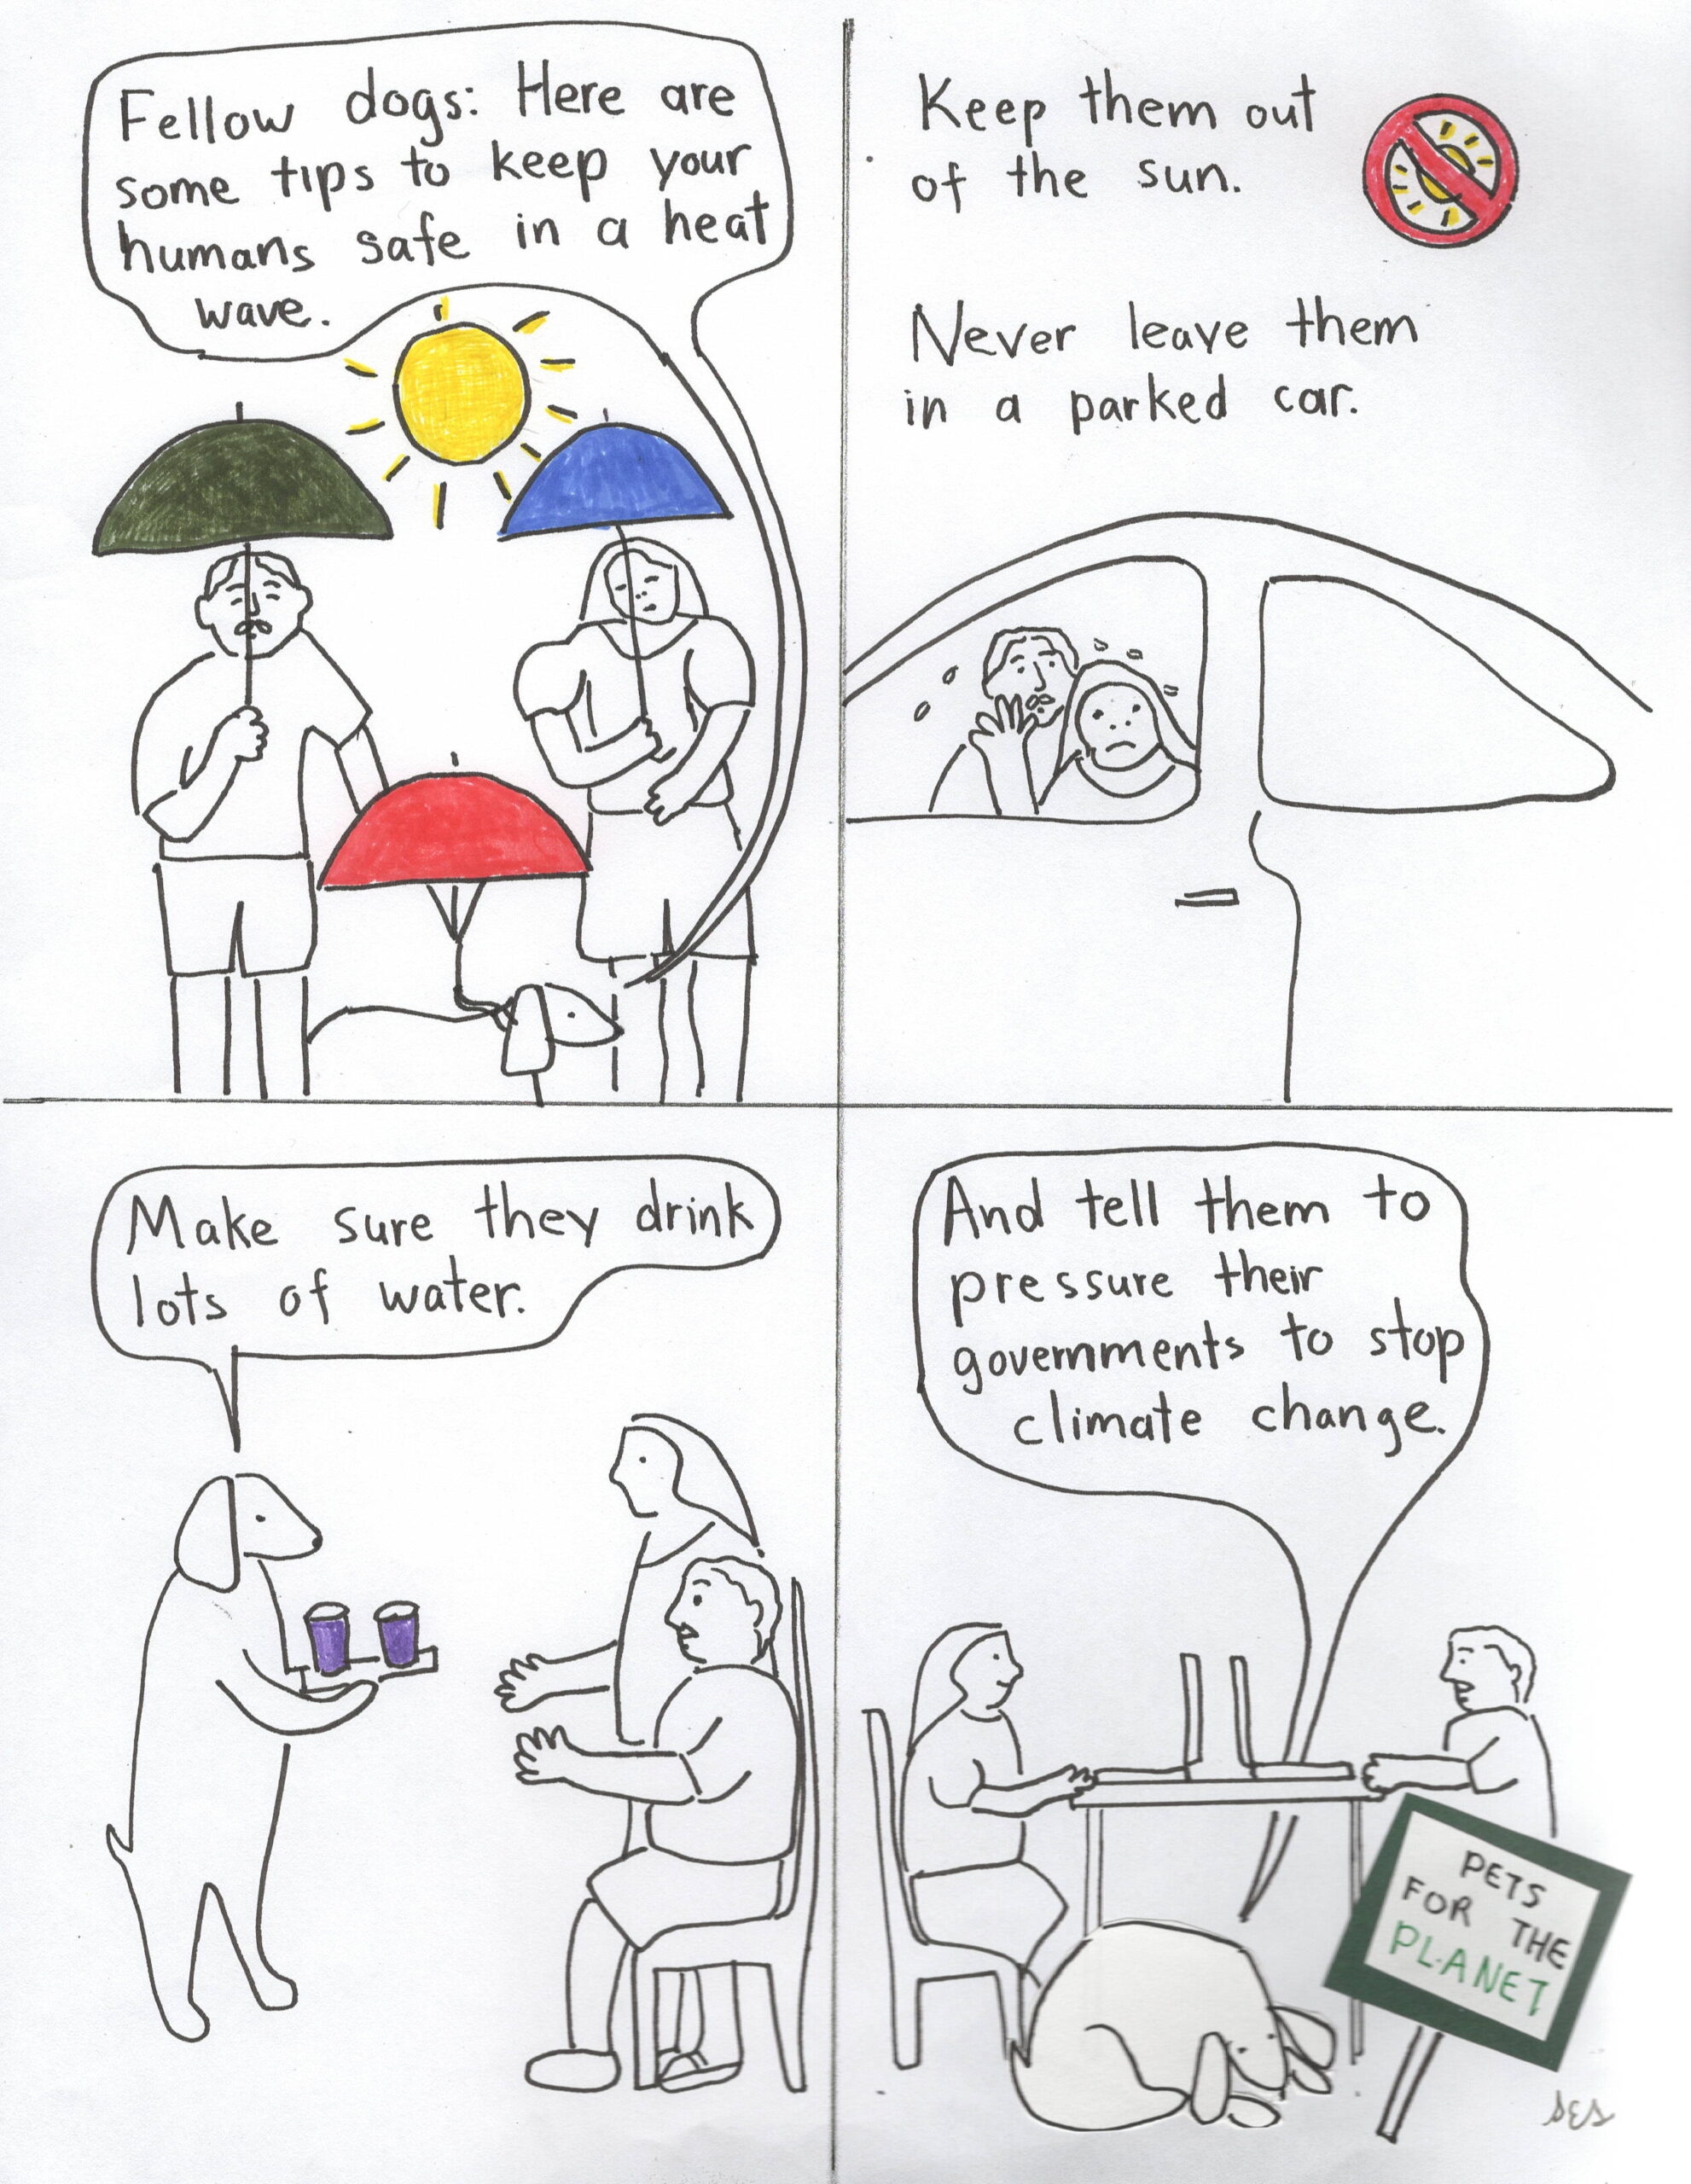 This is a four-panel comic. In panel one a man and a woman and a dog are all holding sun umbrellas against  a very hot sun. The dog is saying: "Fellow dogs, here are some tips to keep your humans safe in a heat wave."

 

In panel two the text says: "Keep them out of the sun."  There is a picture of a sun with a circular "no" symbol over it. The text also says: "Never leave them in a parked car."  We see  two very hot unhappy people trying to get out of the car.

 

In panel three the dog is saying: "Make sure they drink lots of water."  The dog is handing glasses of water to the humans.

 

In panel four the humans are busy with their computers.  The dog is saying: "And tell them to pressure their governments to stop climate change".  The dog has a sign that says "Pets for the Planet".